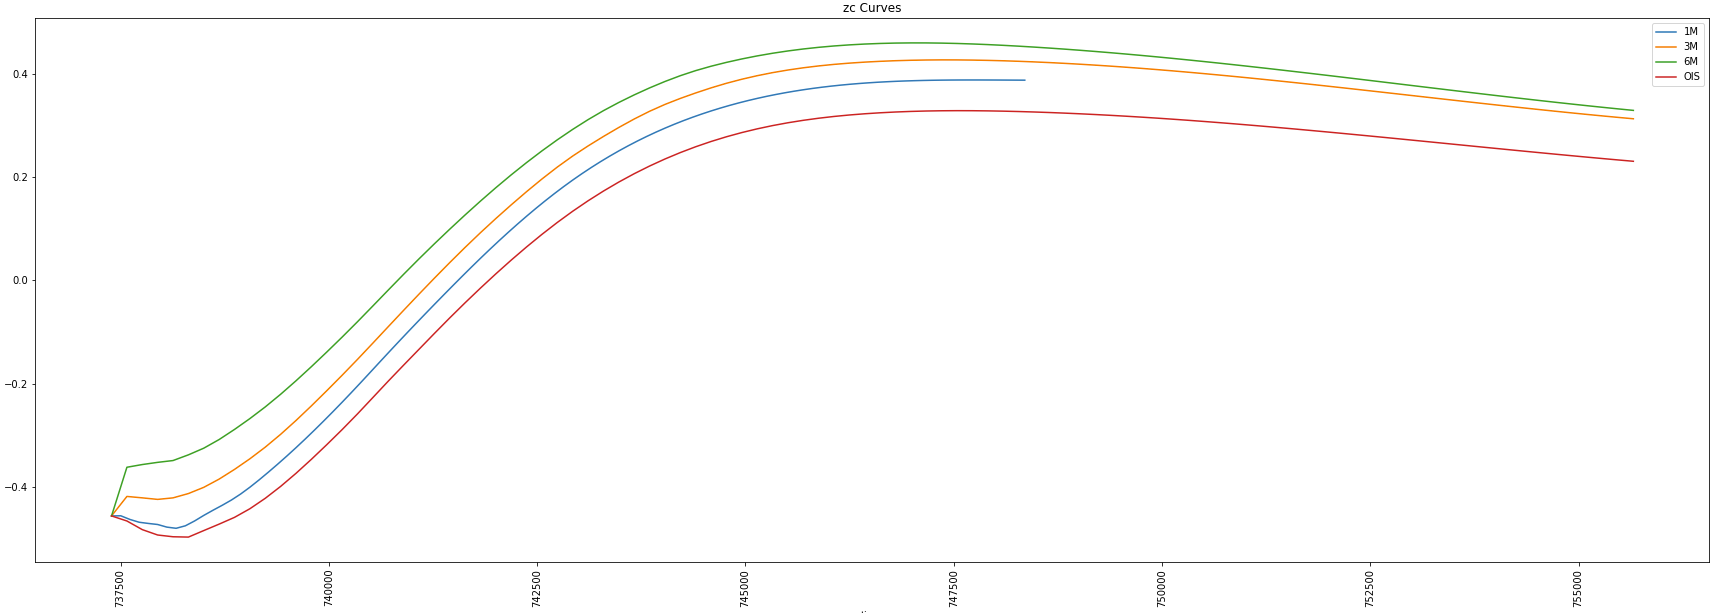 Curves generated for the 1M, 3M and 6M Eurobor swap as well as the EONIA Zero-Coupon curve used for discounting